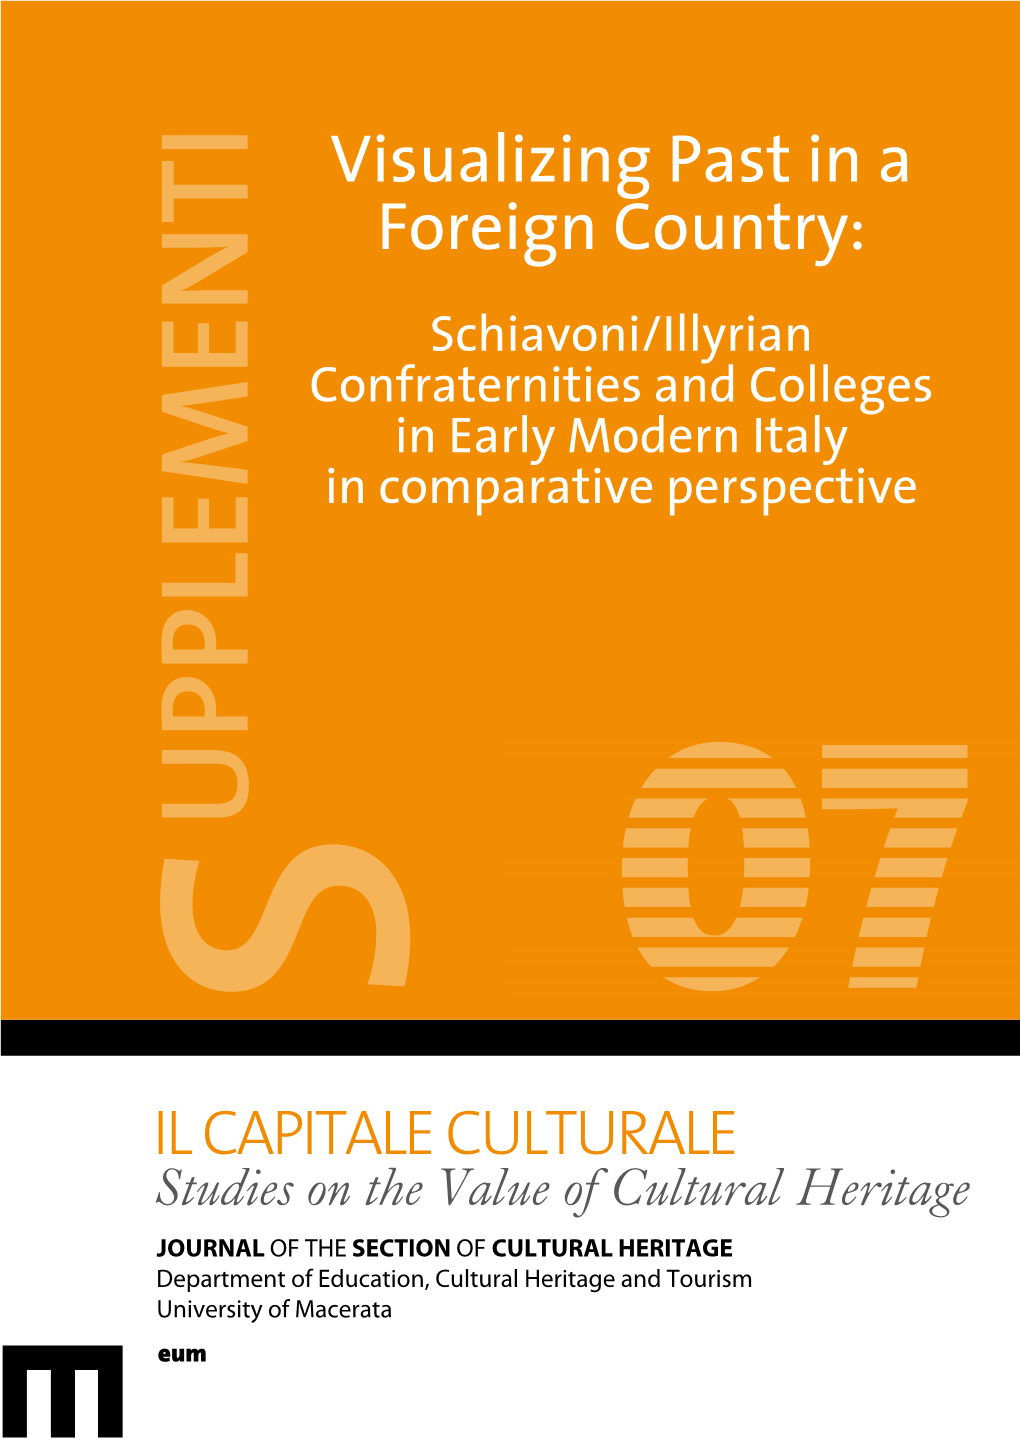 Visualizing Past in a Foreign Country: Schiavoni/Illyrian Confraternities and Colleges in Early Modern Italy in Comparative Perspective